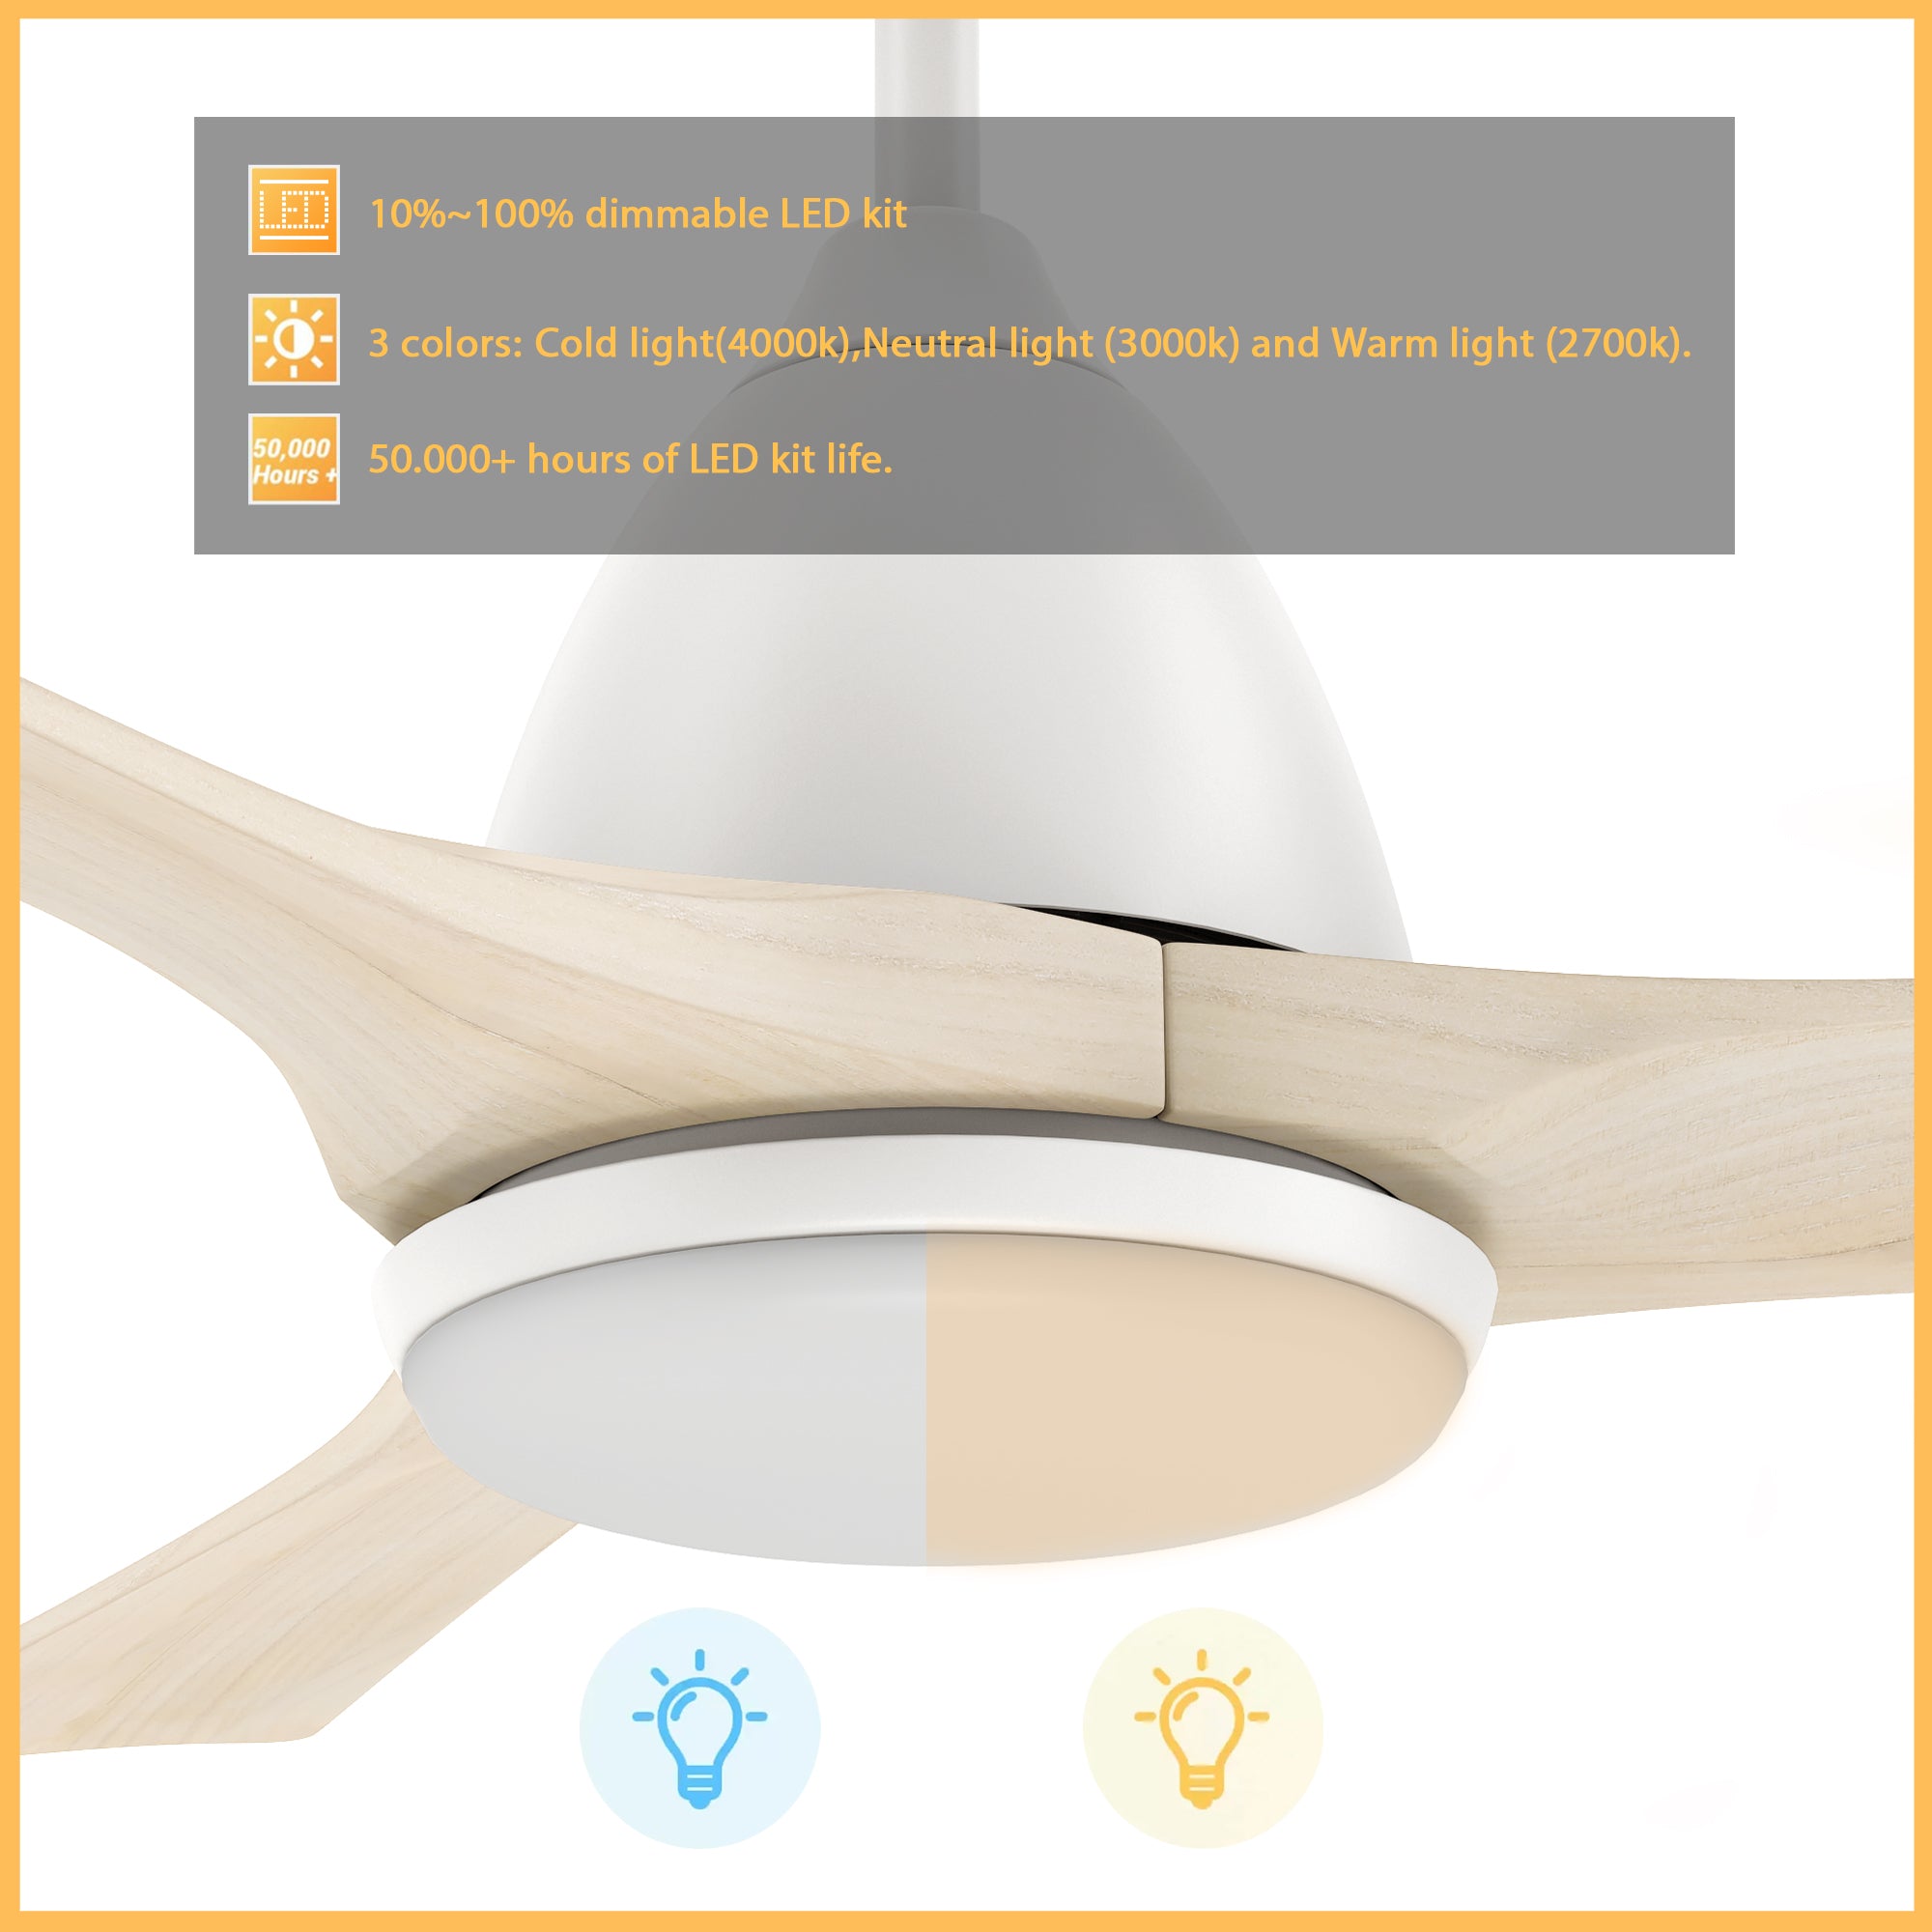 This Cadiz 52&#39;&#39; smart ceiling fan keeps your space cool, bright, and stylish. It is a soft modern masterpiece perfect for your large indoor living spaces. This Wifi smart ceiling fan is a simplicity designing with White finish, use elegant Solid Wood blades and has an integrated 4000K LED daylight. The fan features Remote control, Wi-Fi apps, Siri Shortcut and Voice control technology (compatible with Amazon Alexa and Google Home Assistant ) to set fan preferences. 